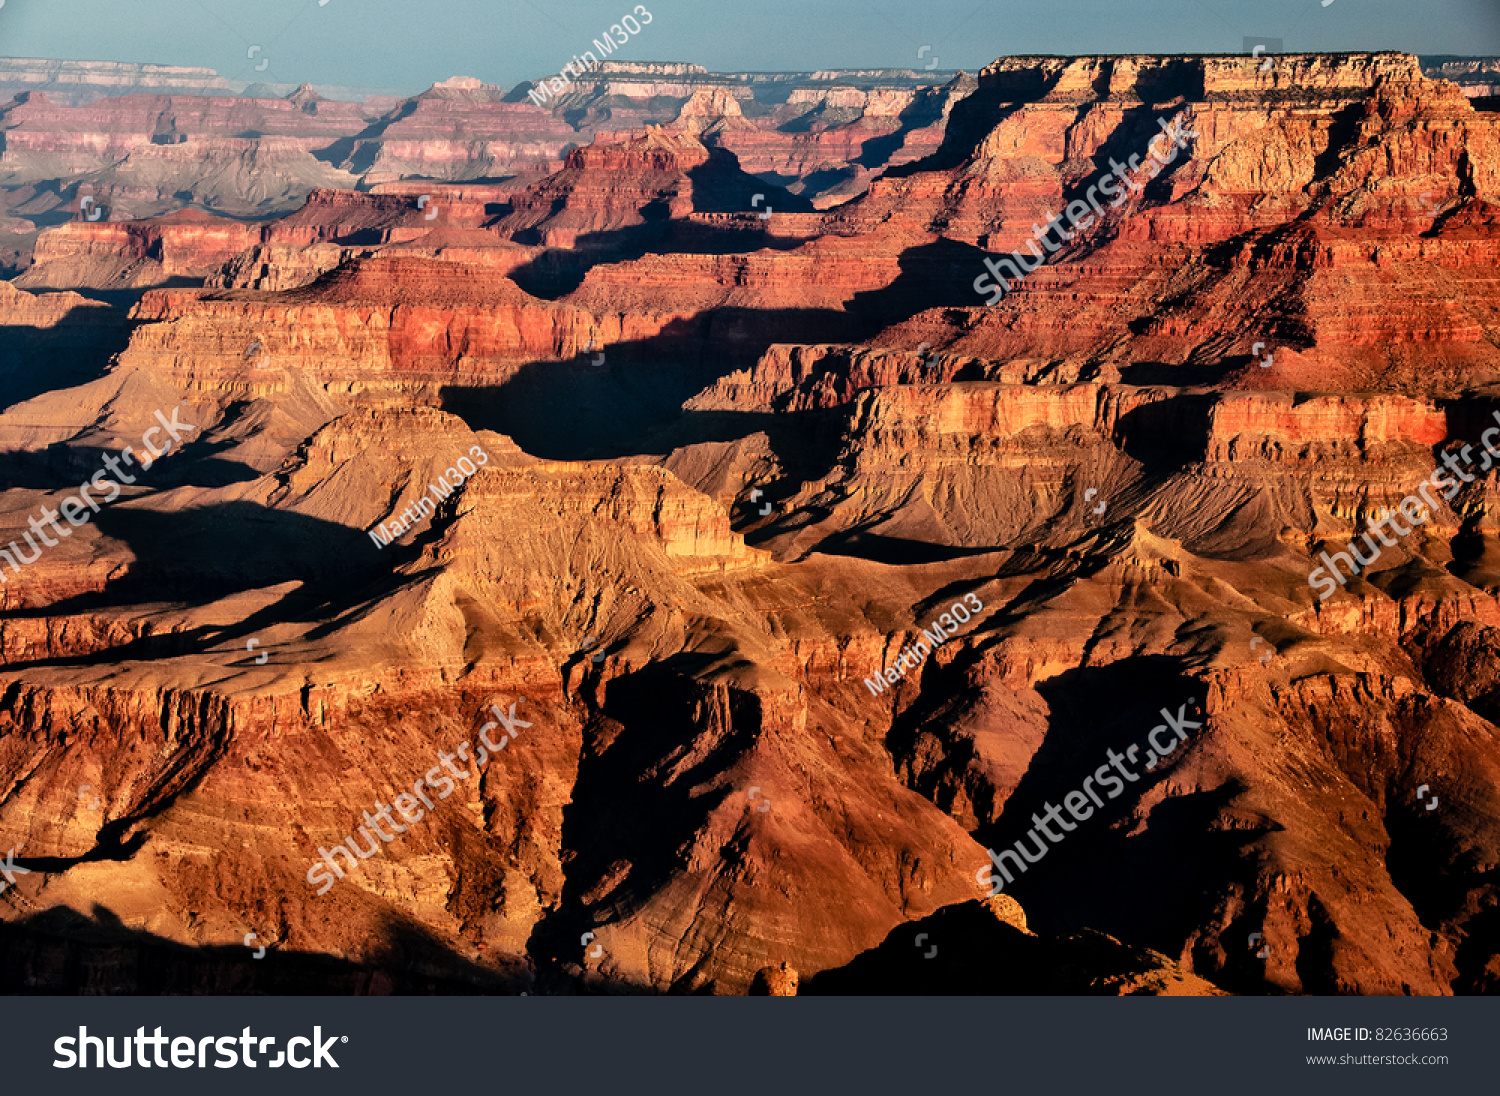 Scenic view of sunrise in Grand Canyon national park, Arizona, USA #82636663